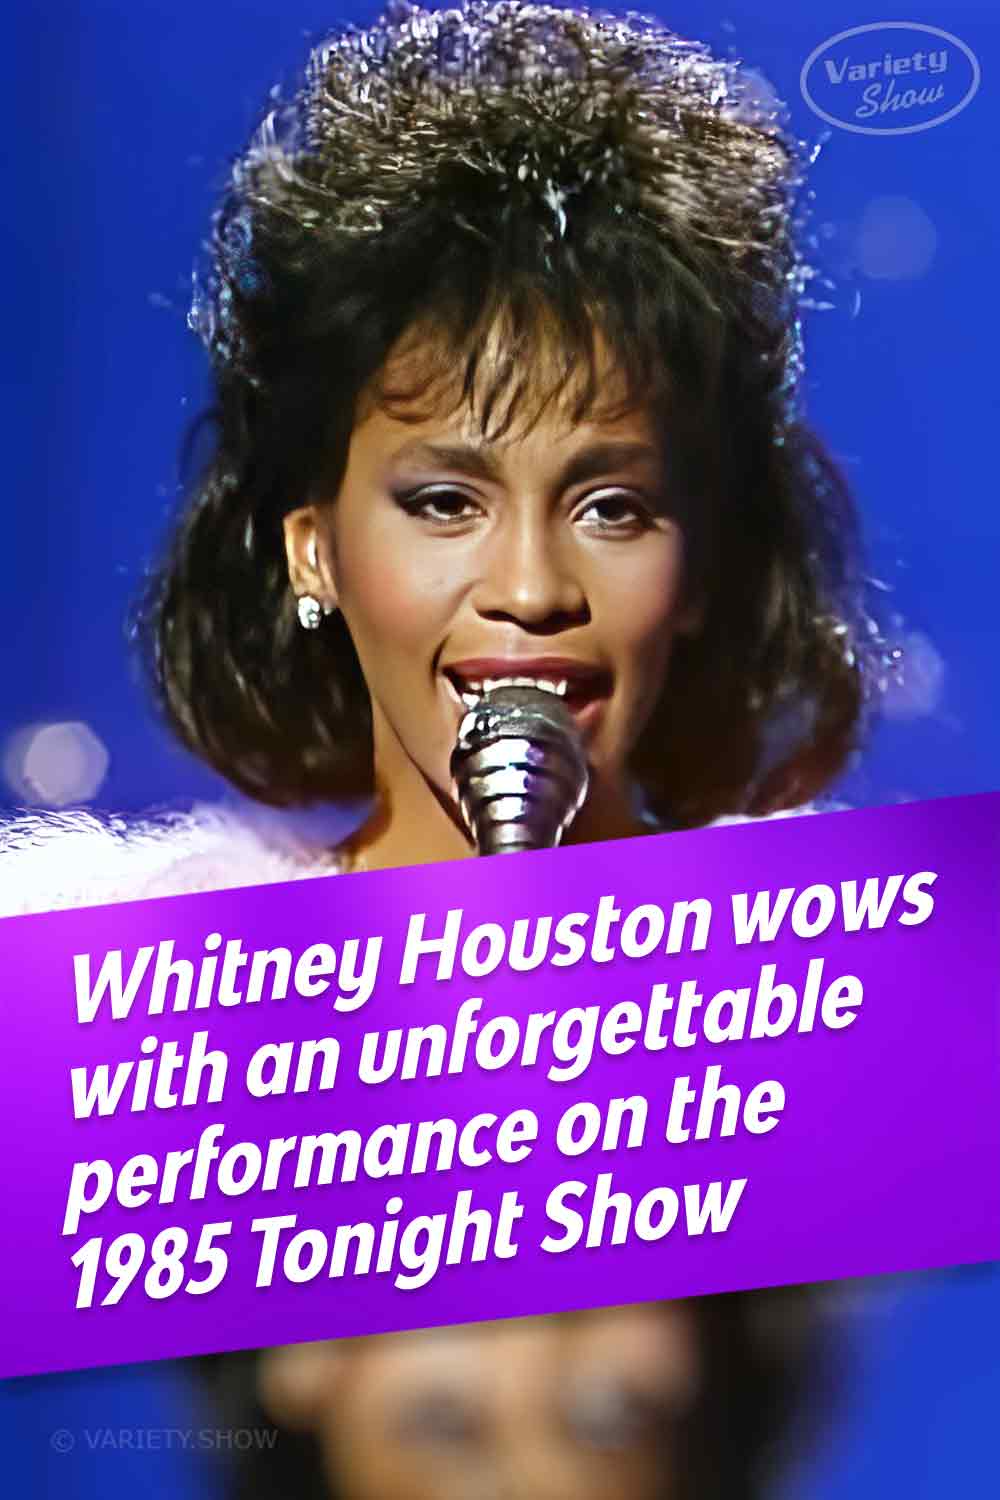 Whitney Houston wows with an unforgettable performance on the 1985 Tonight Show